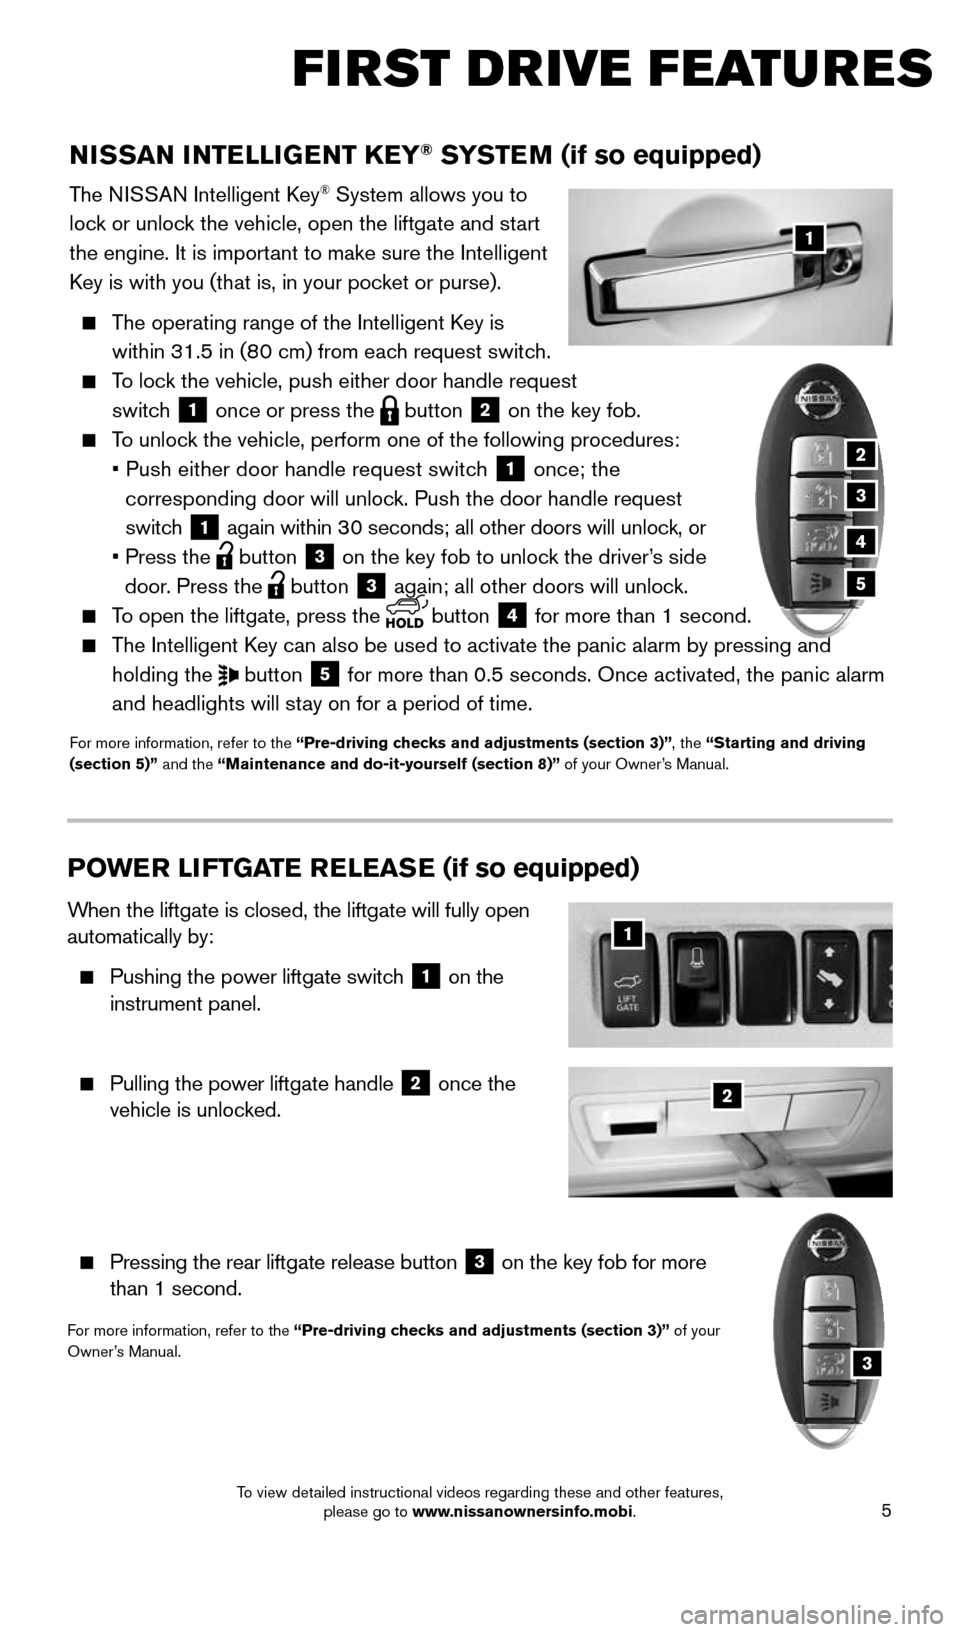 NISSAN ARMADA 2015 1.G Quick Reference Guide 5
NISSAN INTELLIGENT KEY® SYSTEM (if so equipped)
The NISSAN Intelligent Key® System allows you to 
lock or unlock the vehicle, open the liftgate and start 
the engine. It is important to make sure 